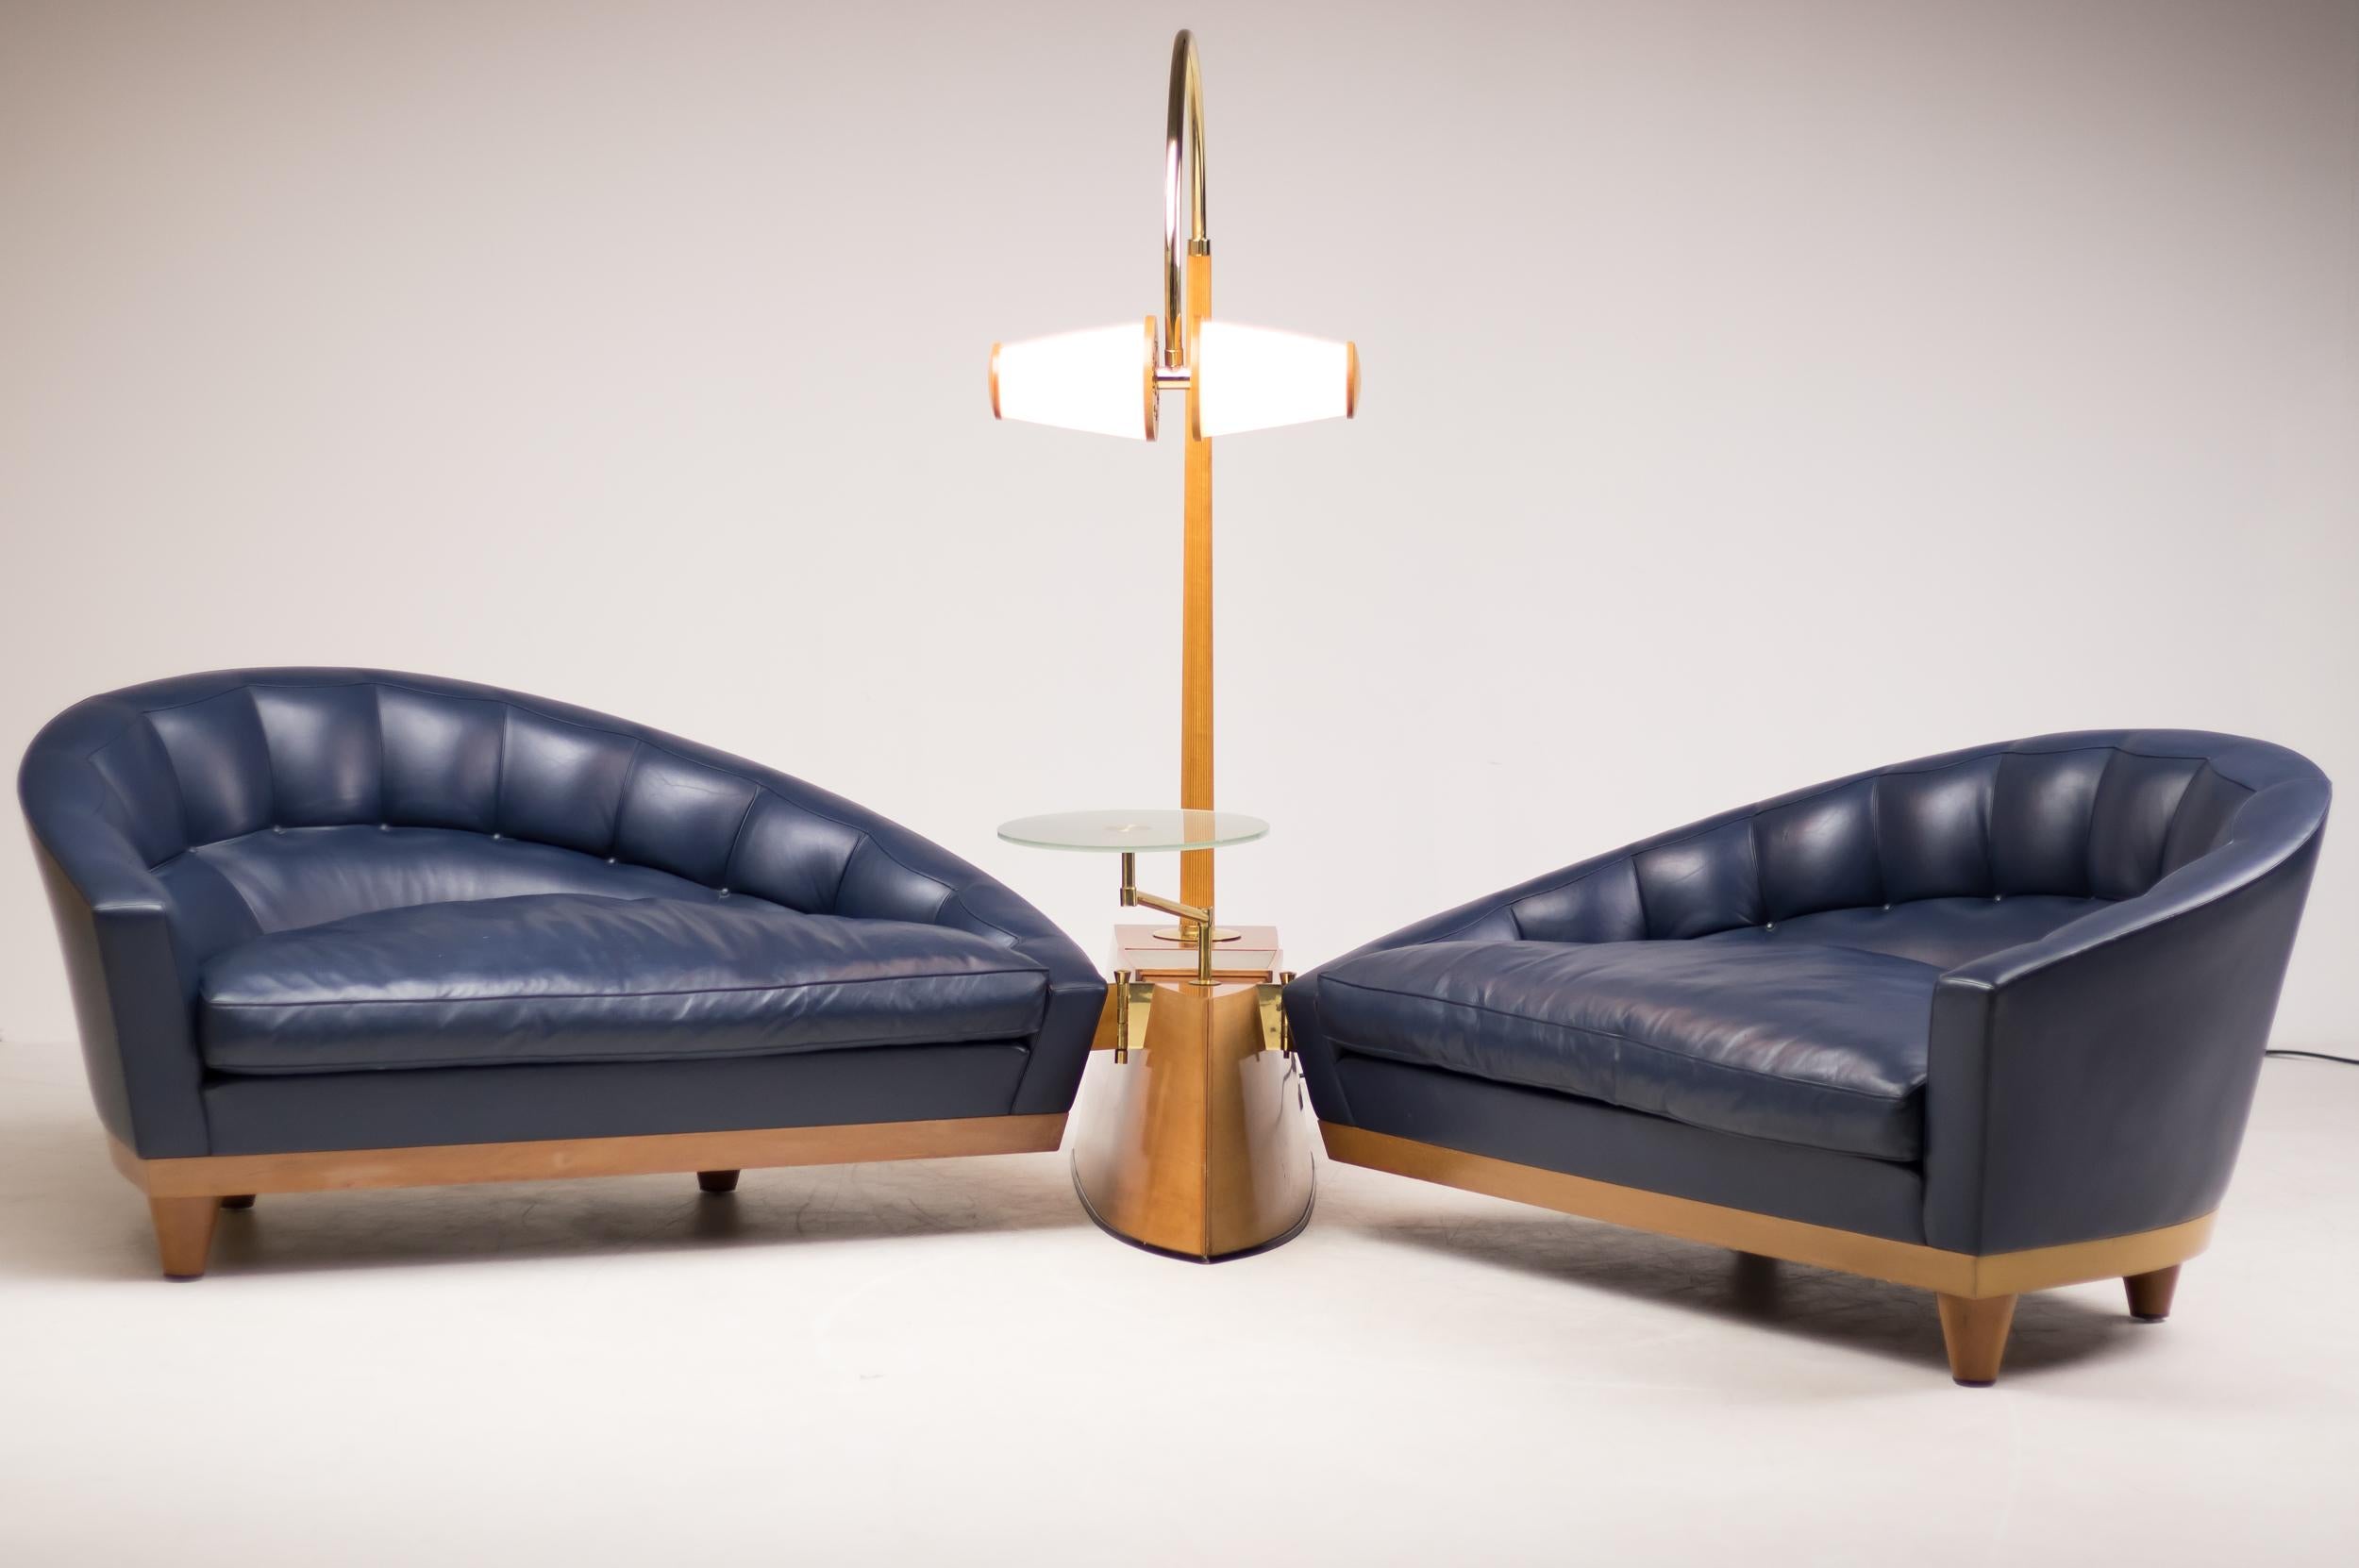 The centre of this piece is a heavy keel shaped base in solid cherrywood. The two blue leather sofas on solid cherry legs with concealed wheels are connected to the base by means of a polished brass hinge.
The base also supports a cherry and brass